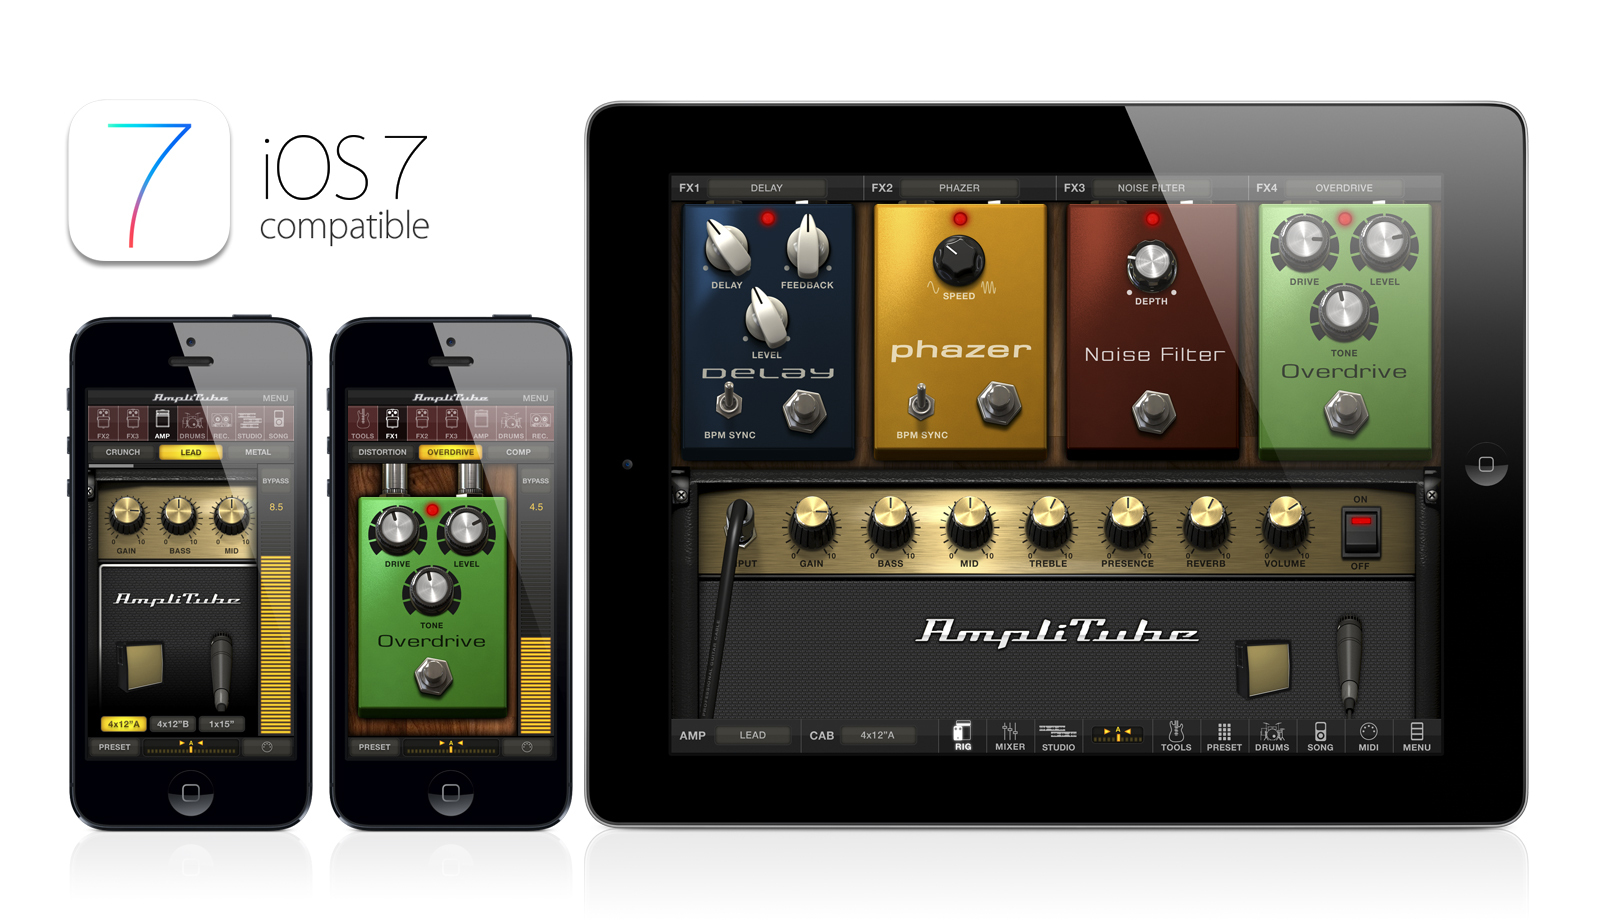 IK Multimedia's AmpliTube adds support for iOS 7 and Inter-App Audio